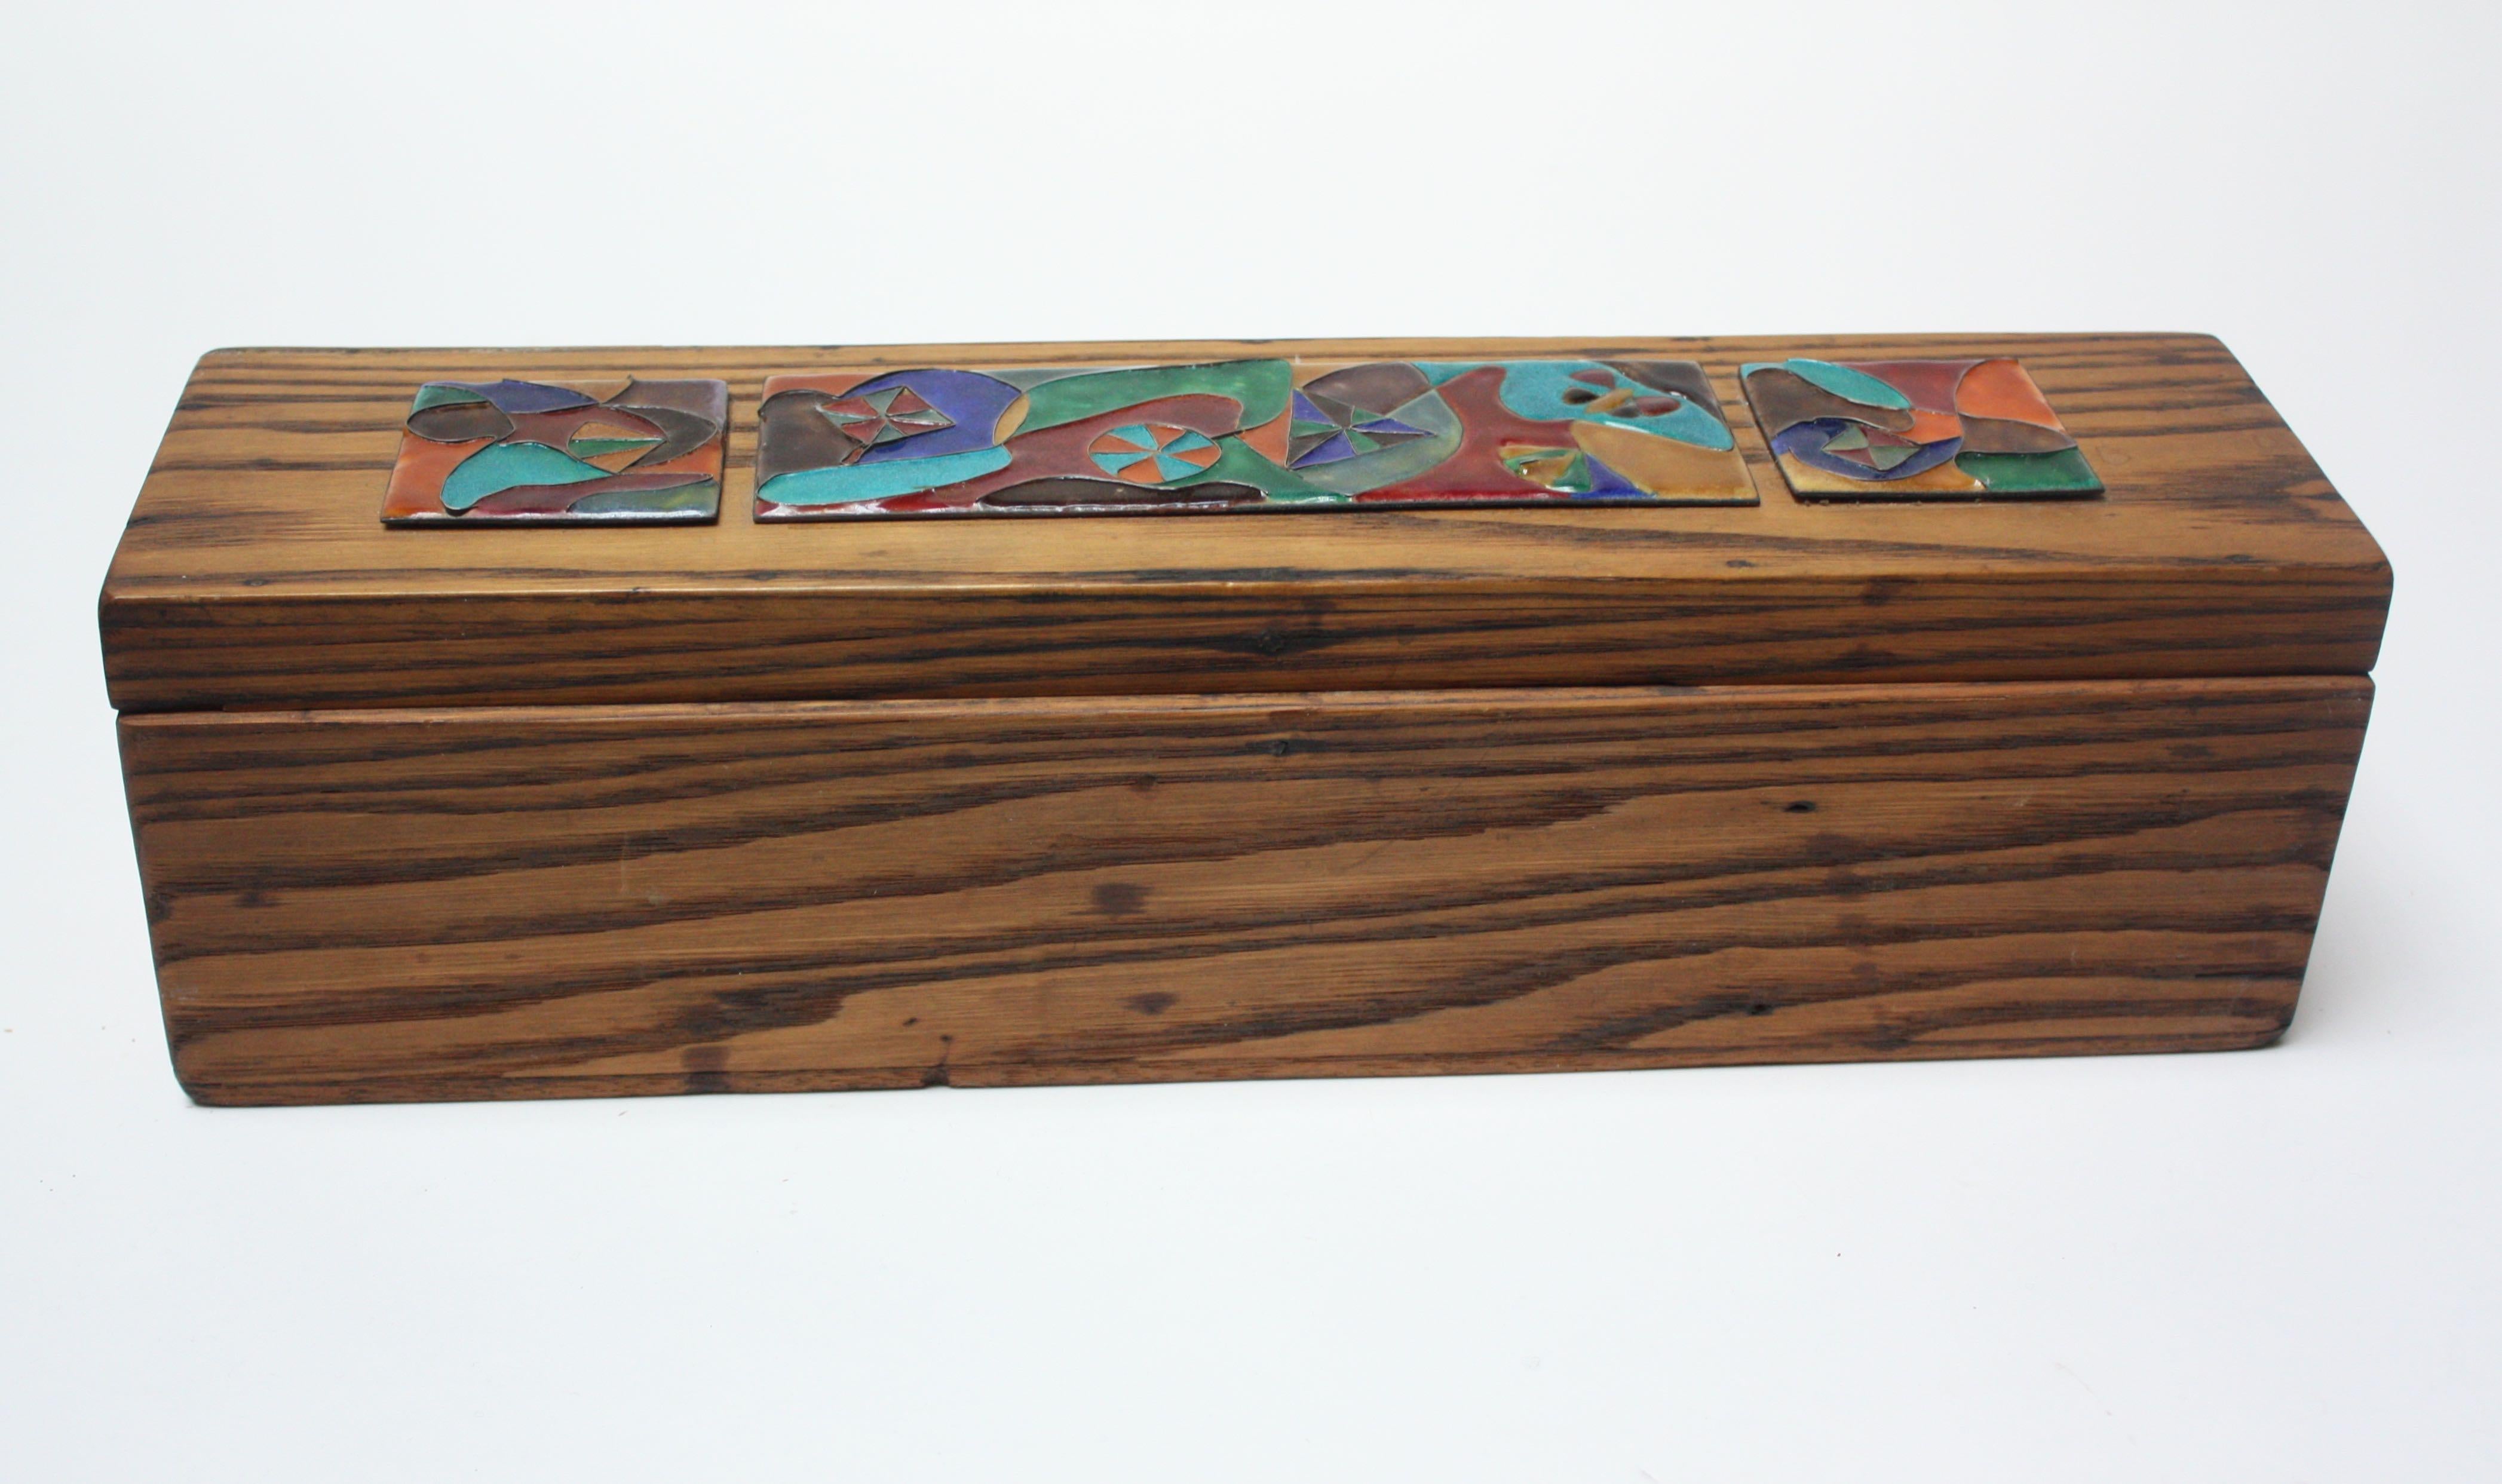 1940s Elizabeth Bensley Enamel and Zebrawood Decorative Box In Good Condition For Sale In Brooklyn, NY